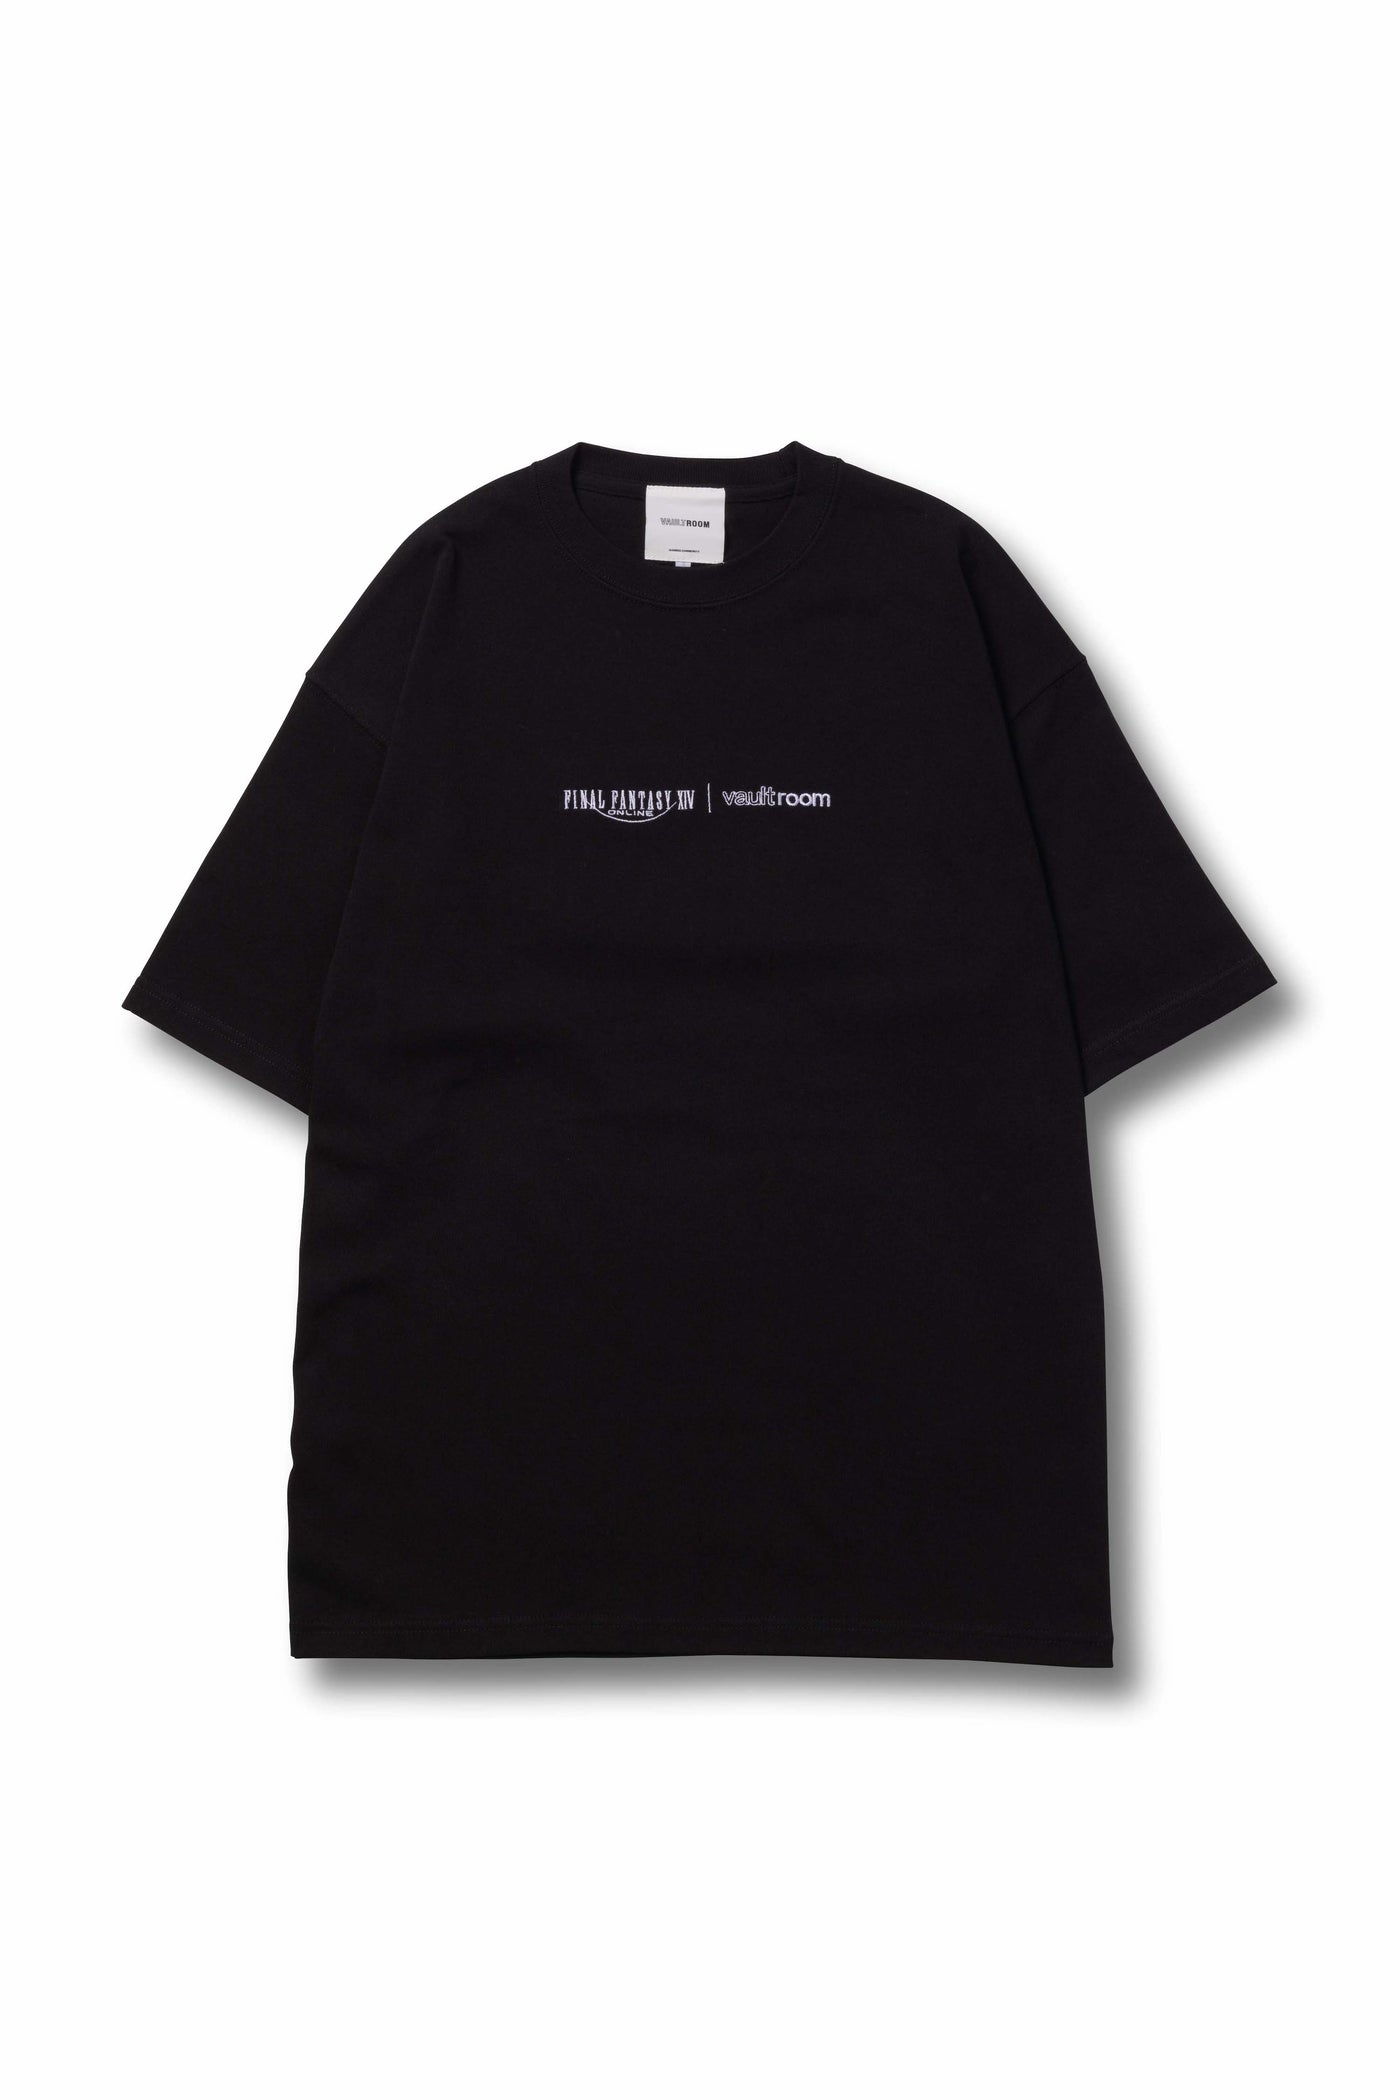 VR × FFXIV LIGHT PARTY TEE / BLK